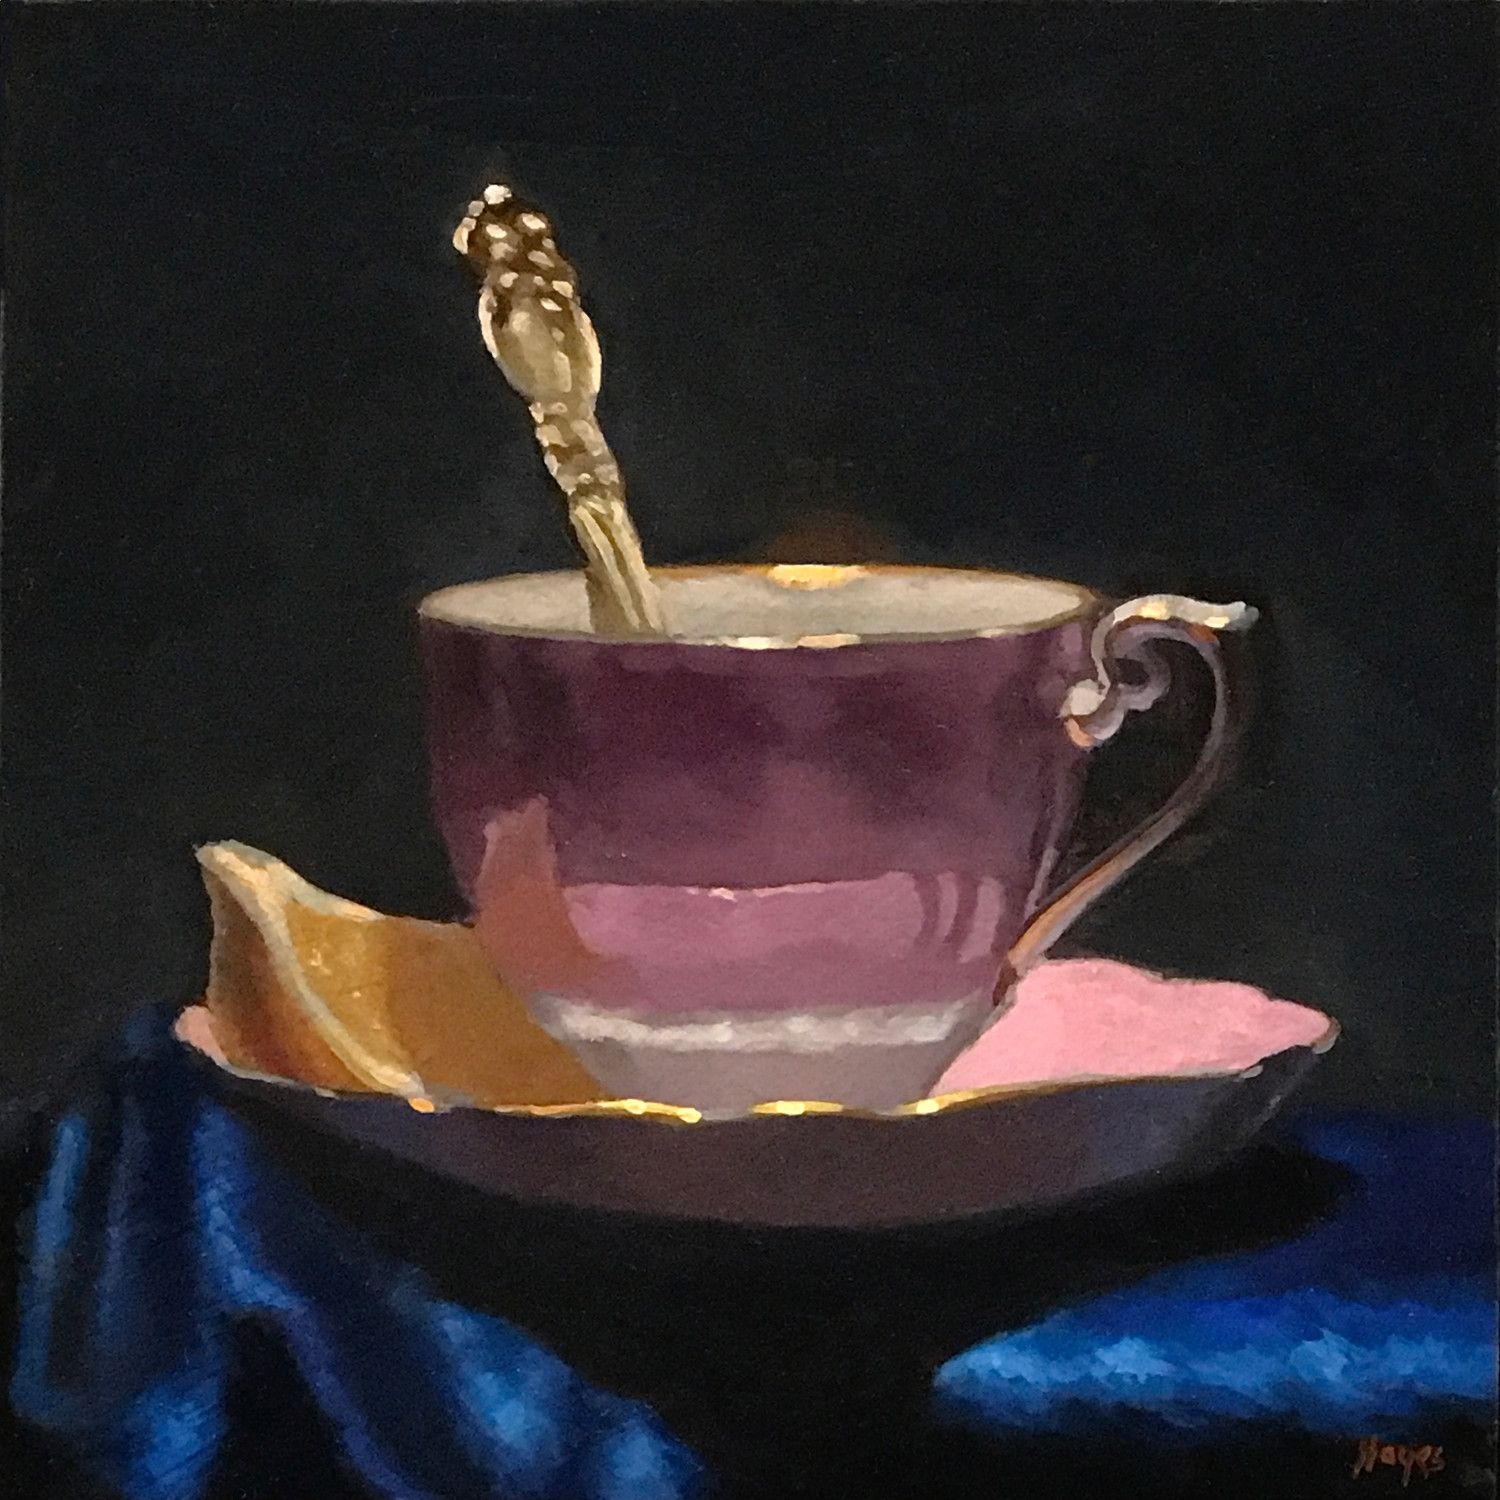 Pink Teacup and Blue Cloth